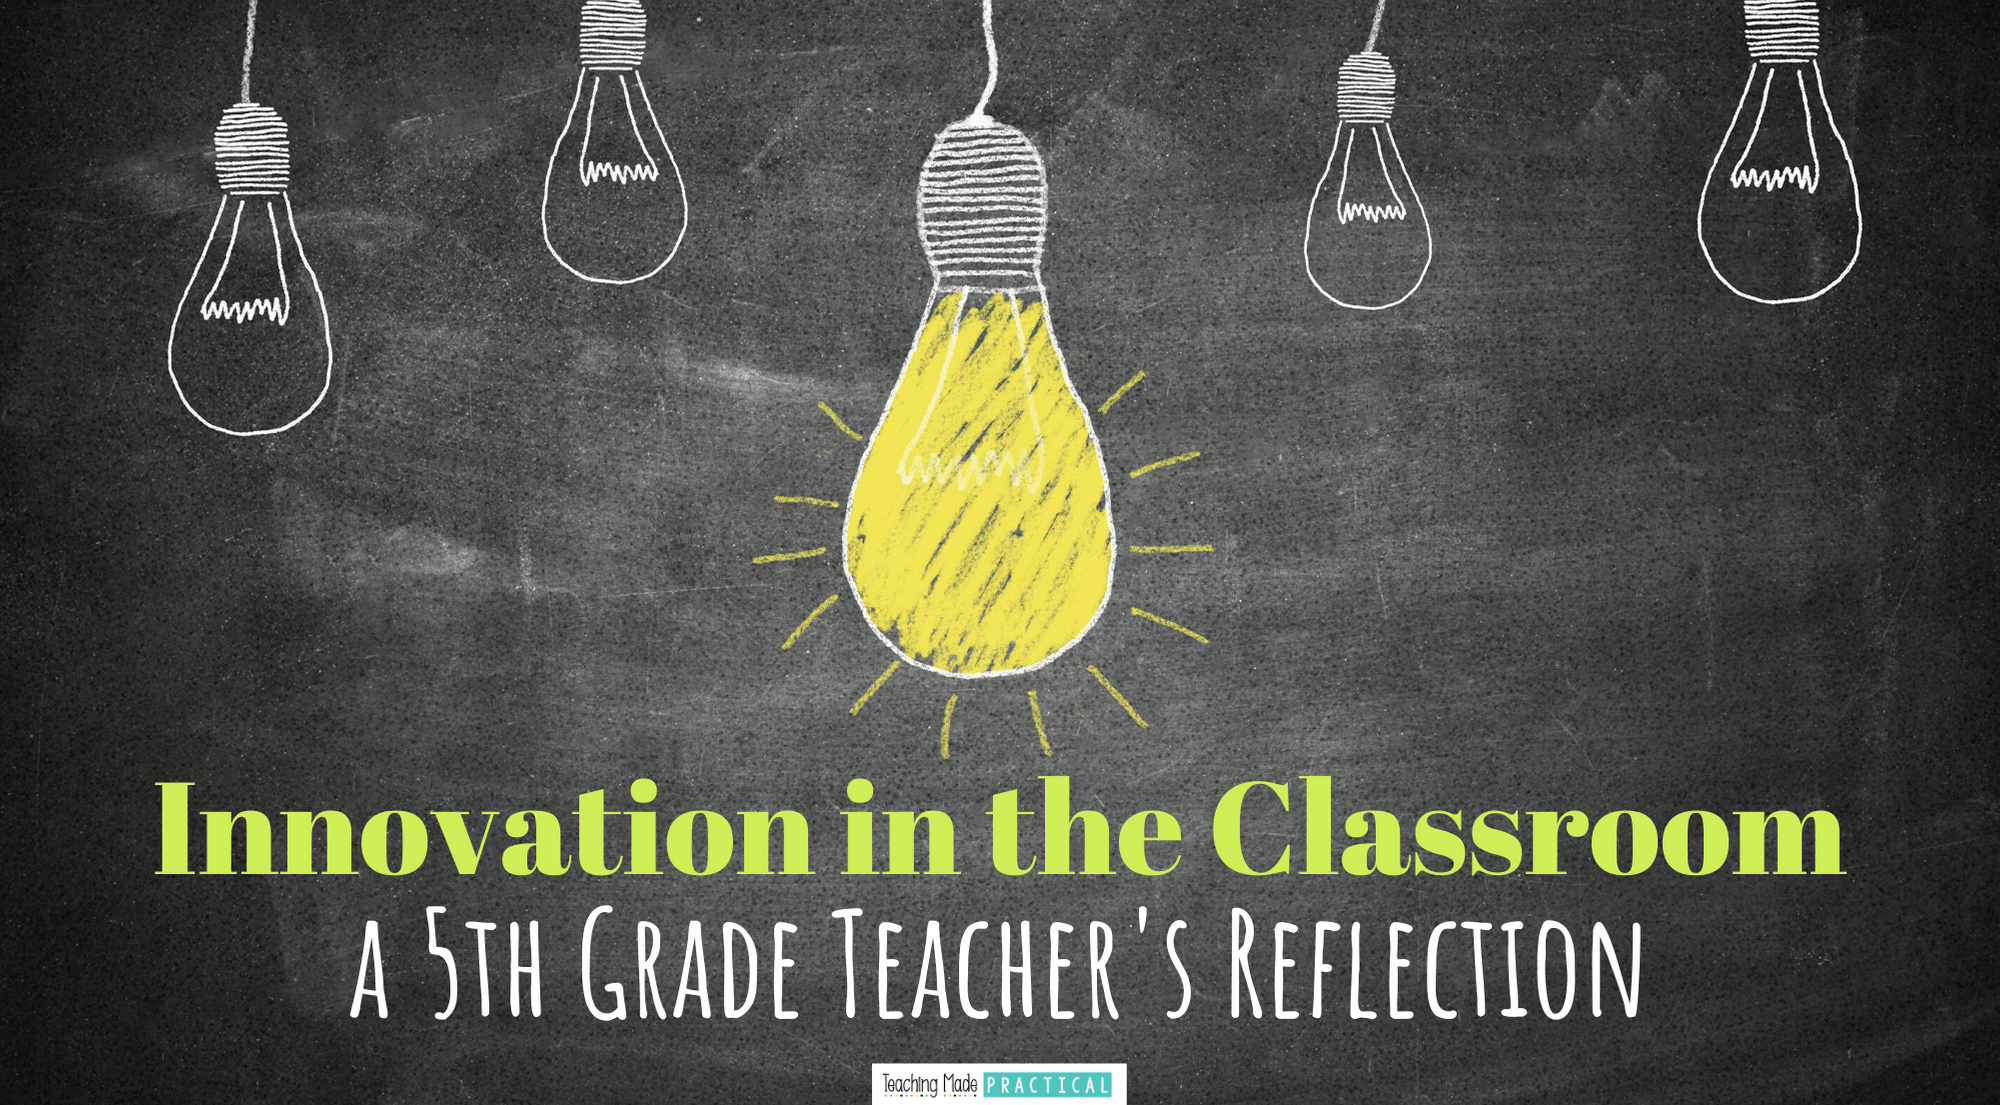 Innovation in the classroom means being a life long learner and being willing to risk failure.  This 5th grade teacher reflects on her innovation journey.